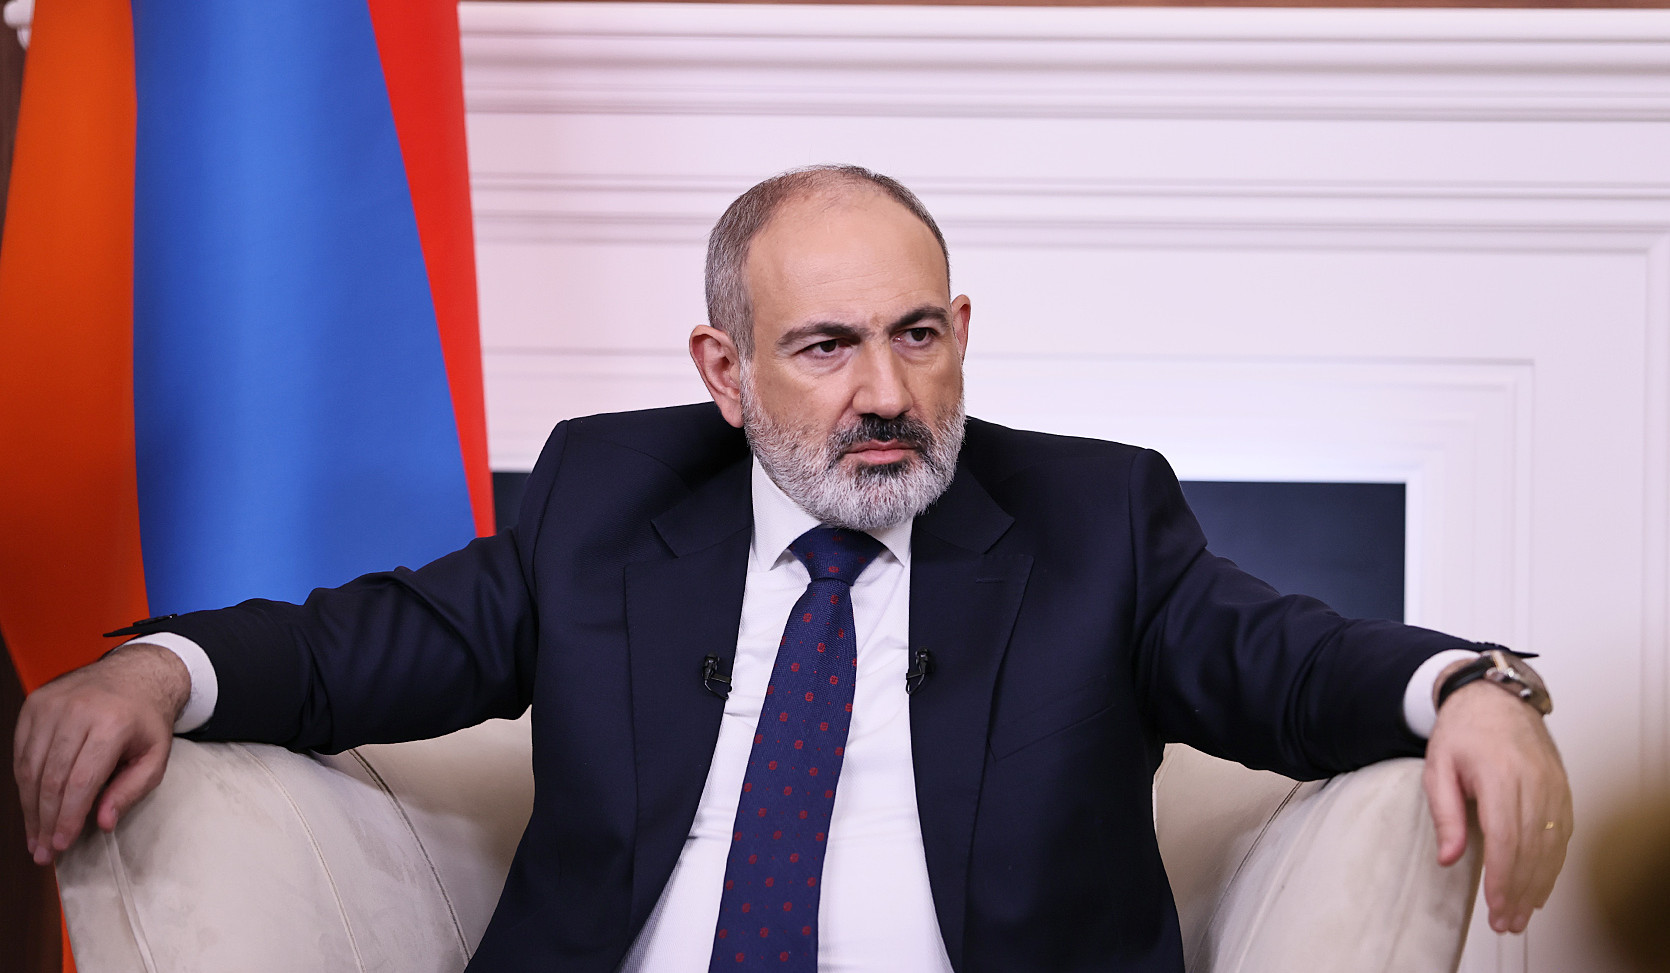 They would have come to the Armenia-Azerbaijan border as an ally of Armenia, not as peacekeepers or peacemakers: Pashinyan